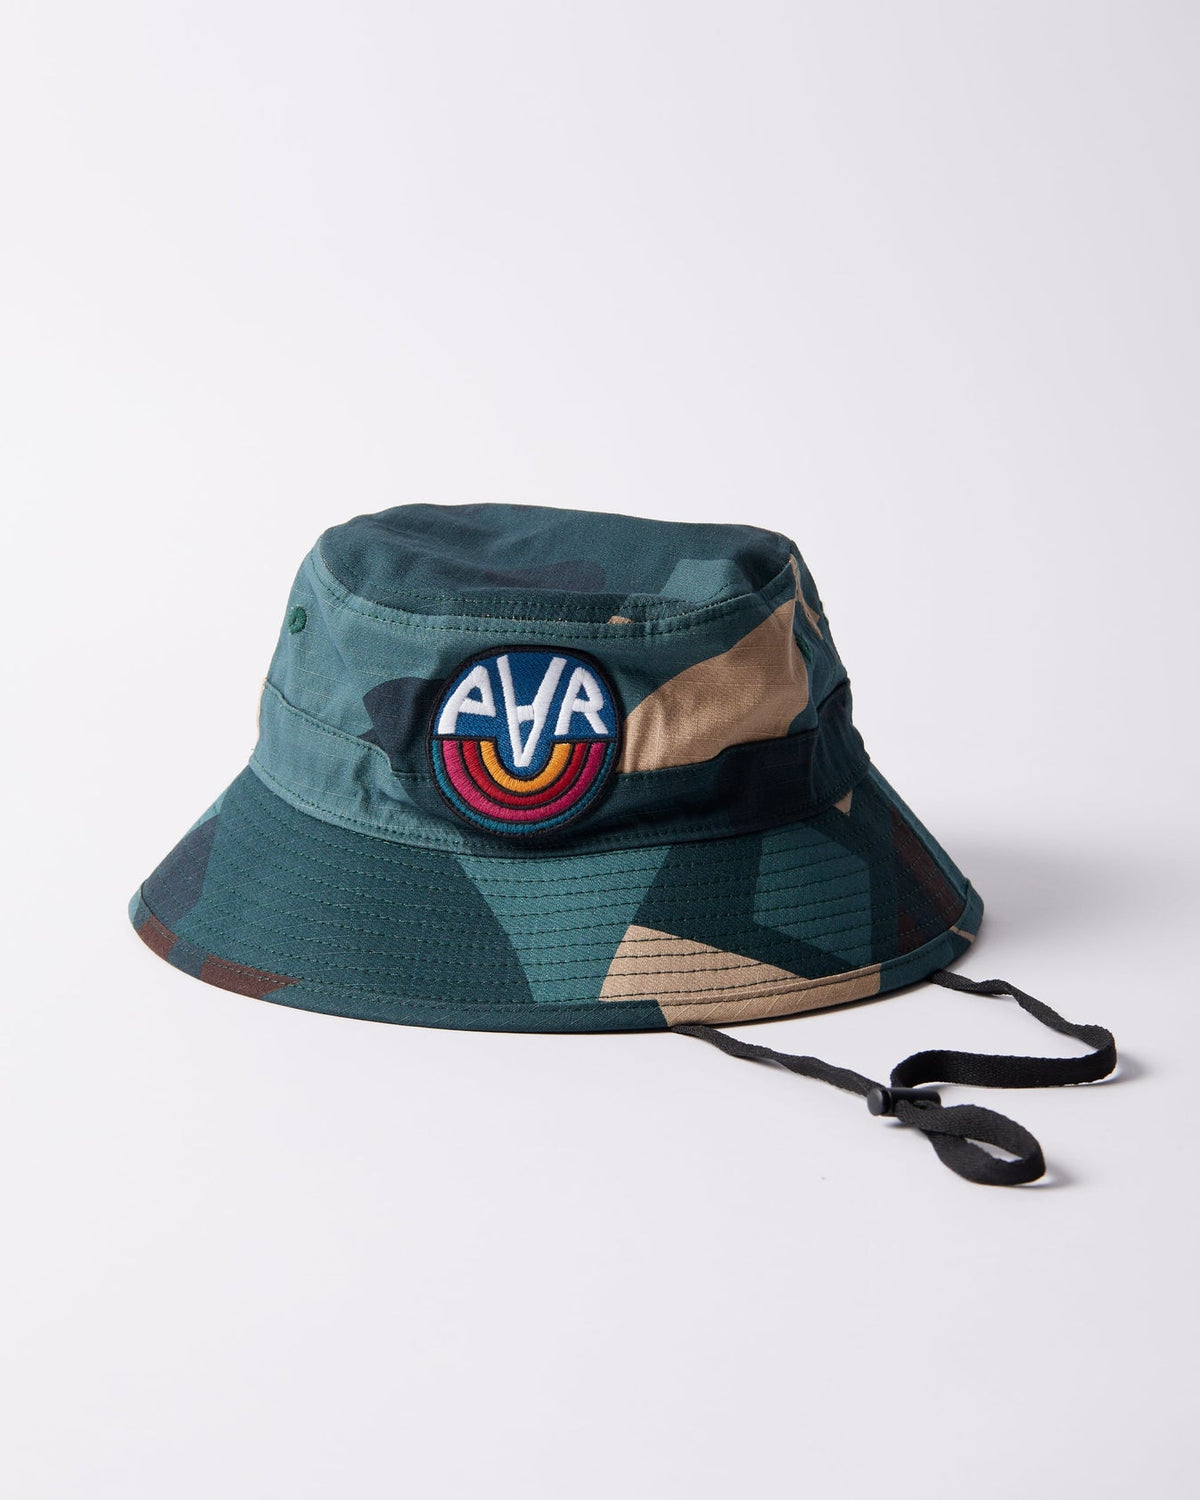 BY PARRA PEACE AND SUN SAFARI HAT